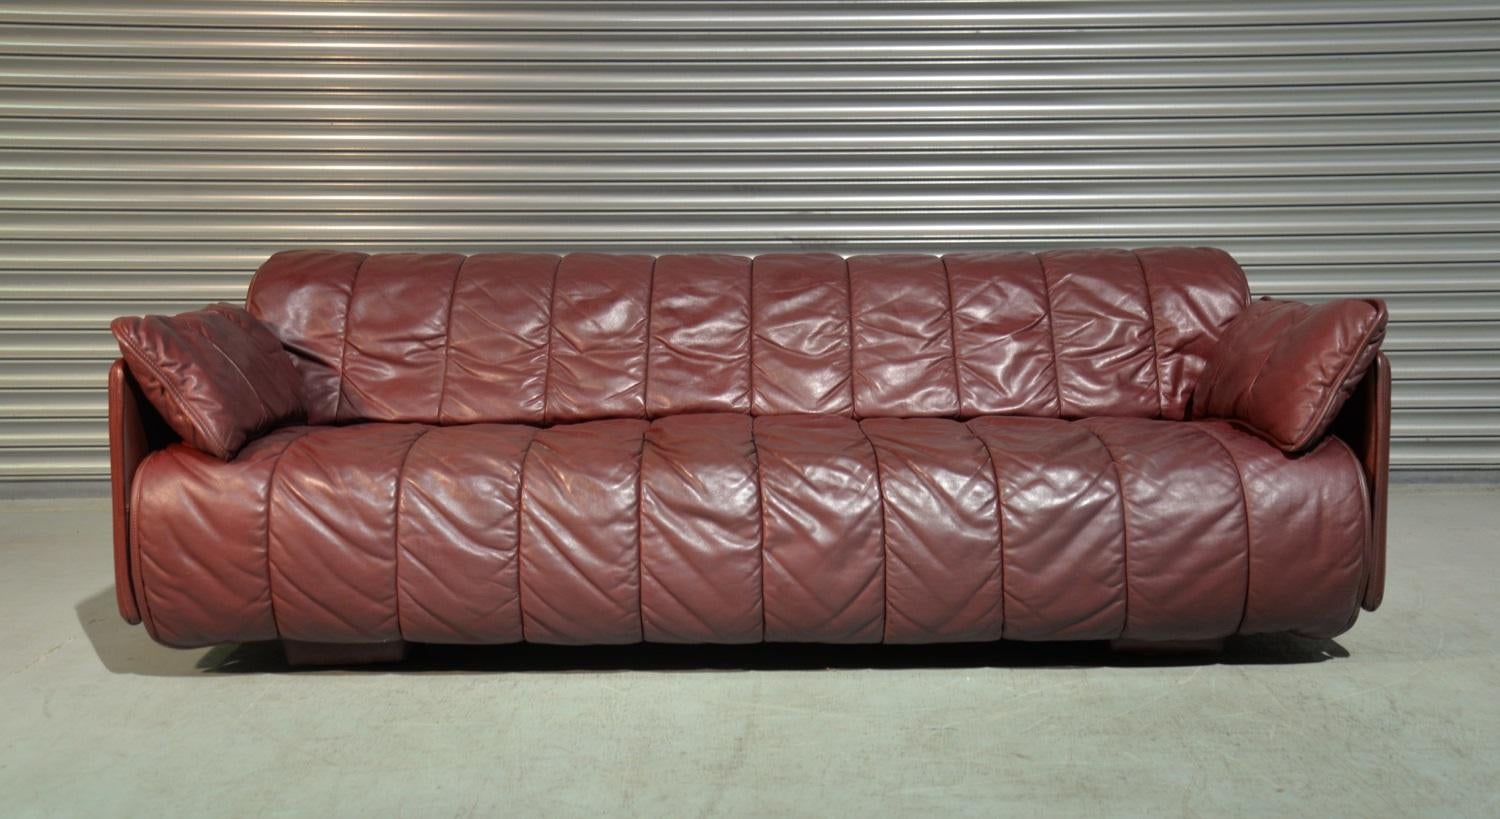 Discounted shipping rates for our US and International customers  (from 2 weeks door to door) 

We are delighted to bring to you an rare vintage De Sede sofa/ daybed. Made by De Sede craftsman in Switzerland, this convertible sofa / day bed is